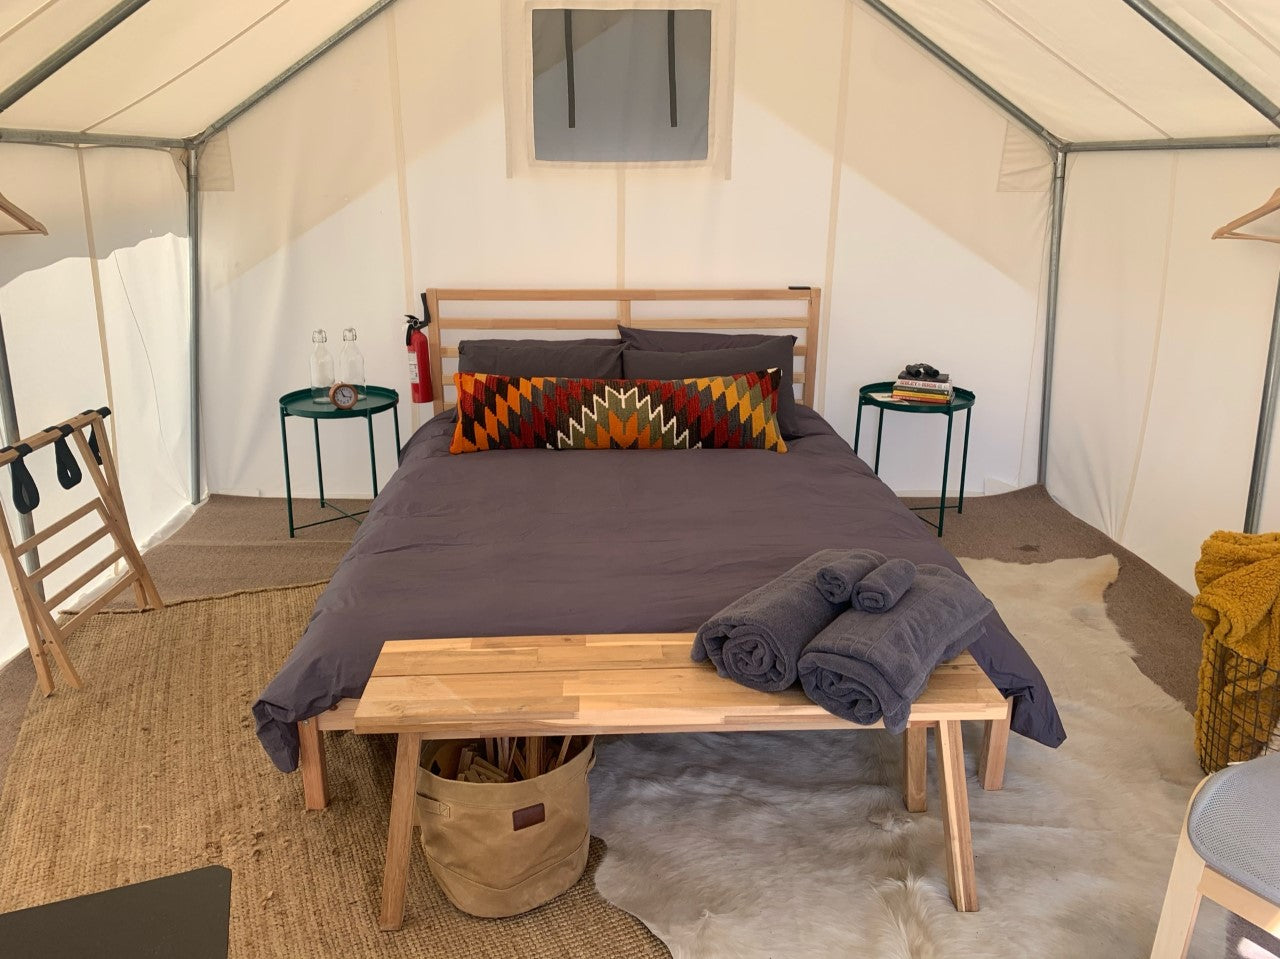 wall tent - glamping tent - glamping - canvas glamping tent